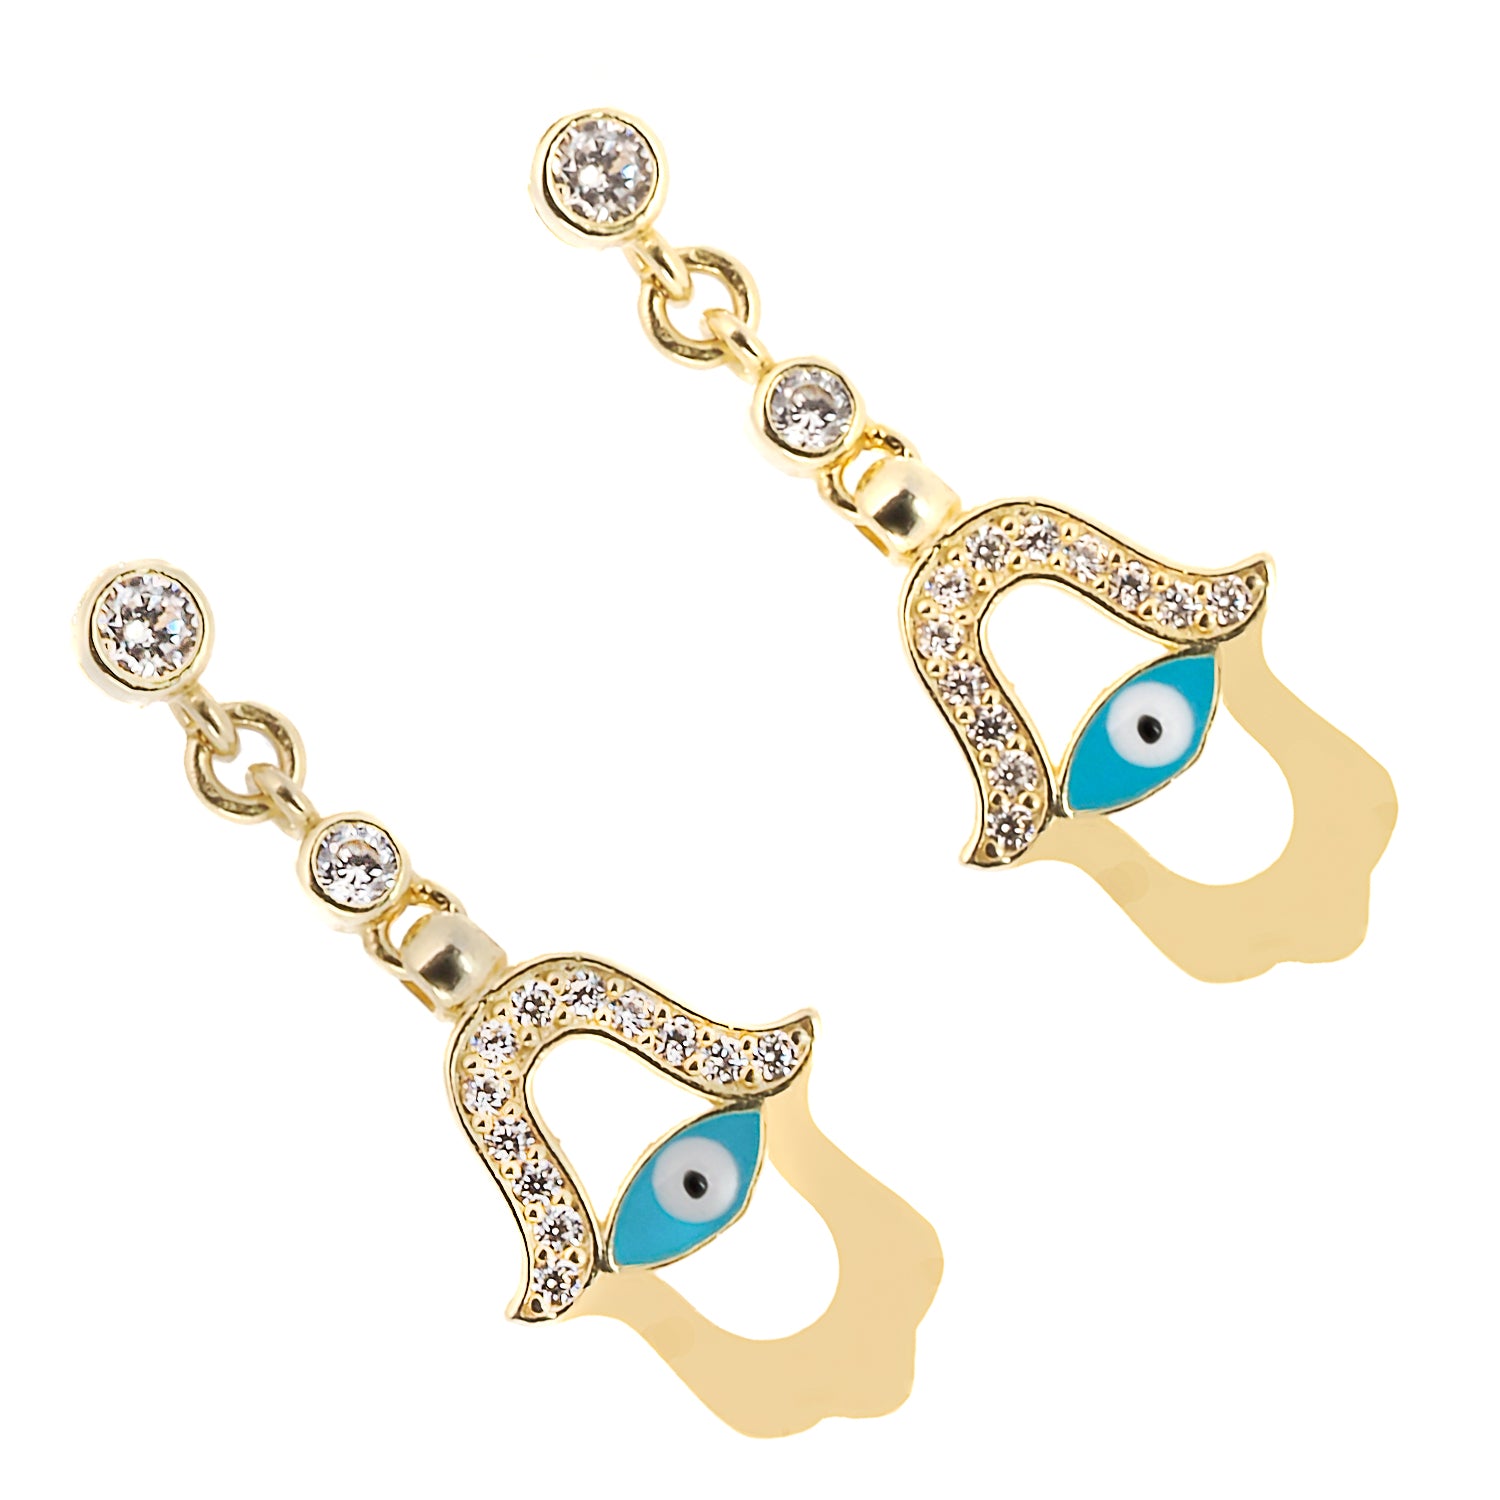 Exquisite Turquoise Evil Eye Gold Hamsa Earrings, crafted with attention to detail and symbolic meaning